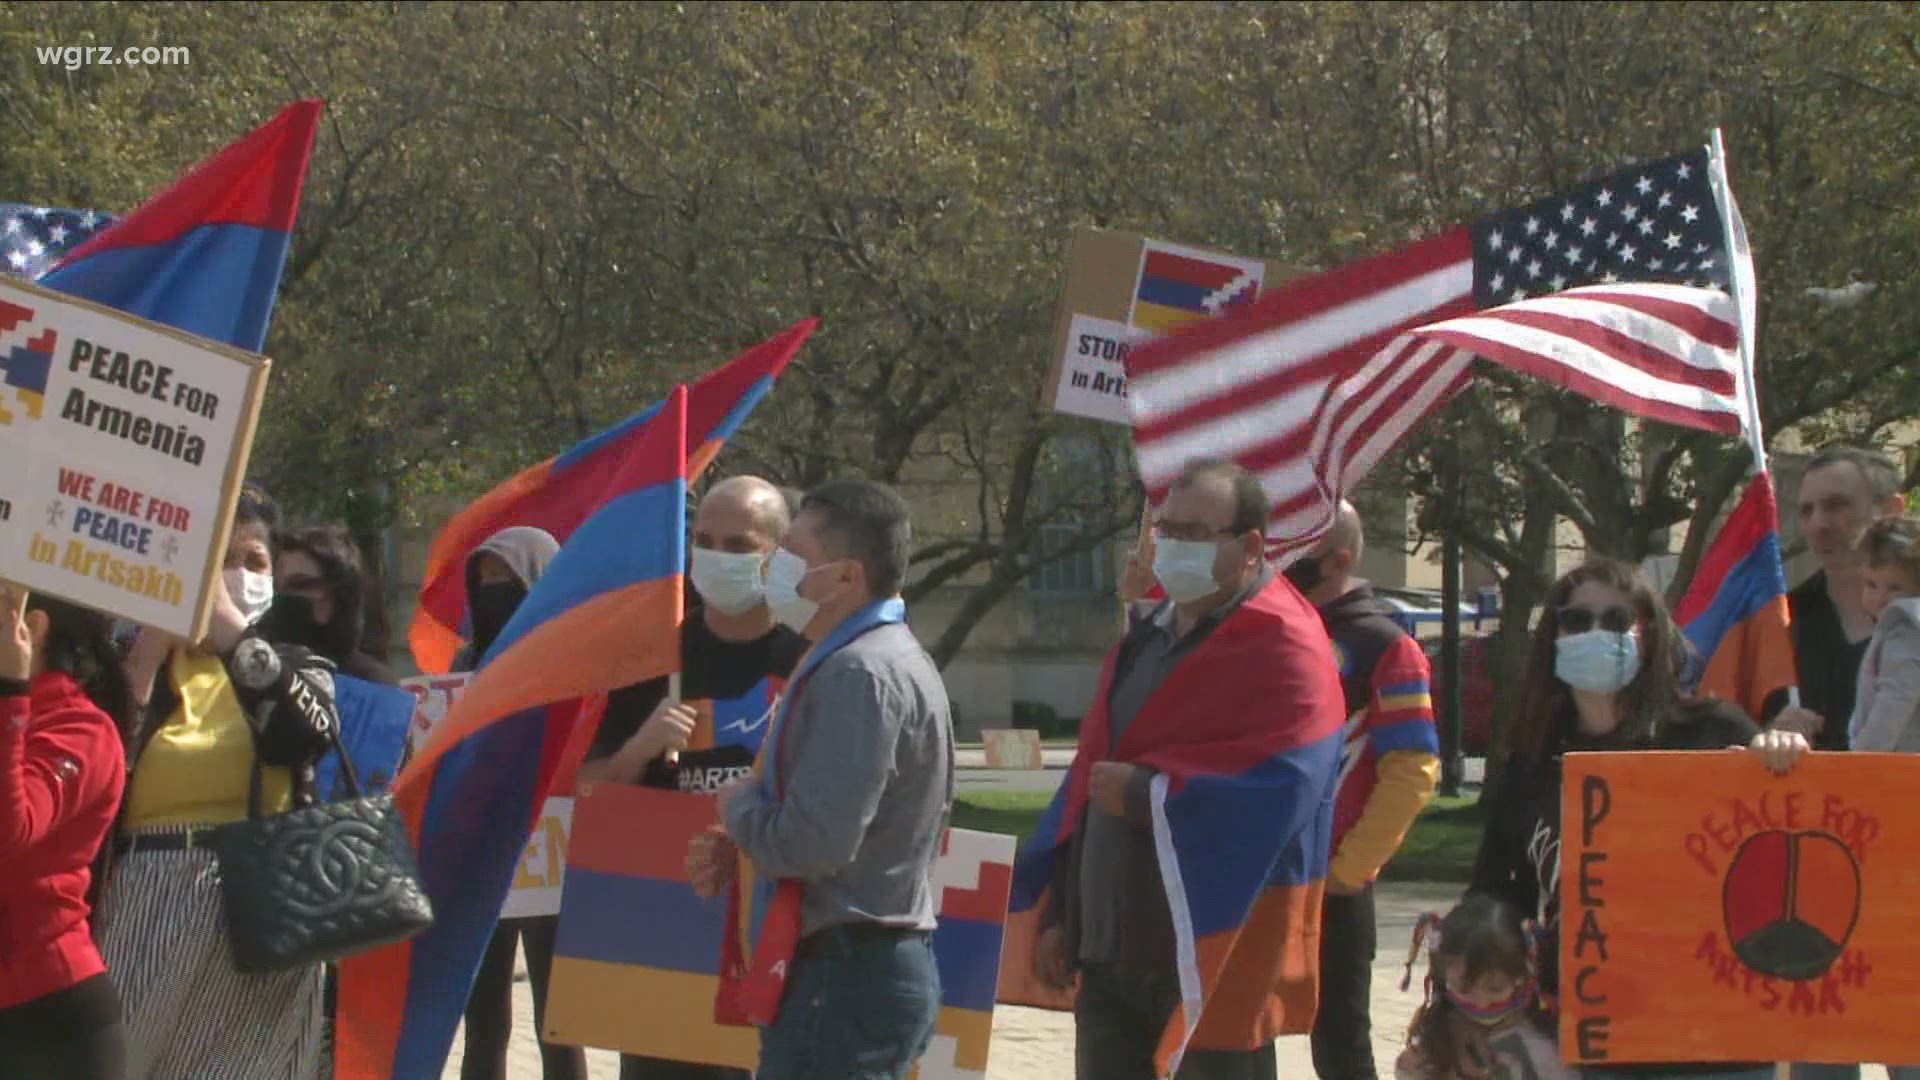 Today in Niagara Square, the Armenian community of Western New York held a peaceful gathering to protest the on-going war between Armenia and Azerbaijan.